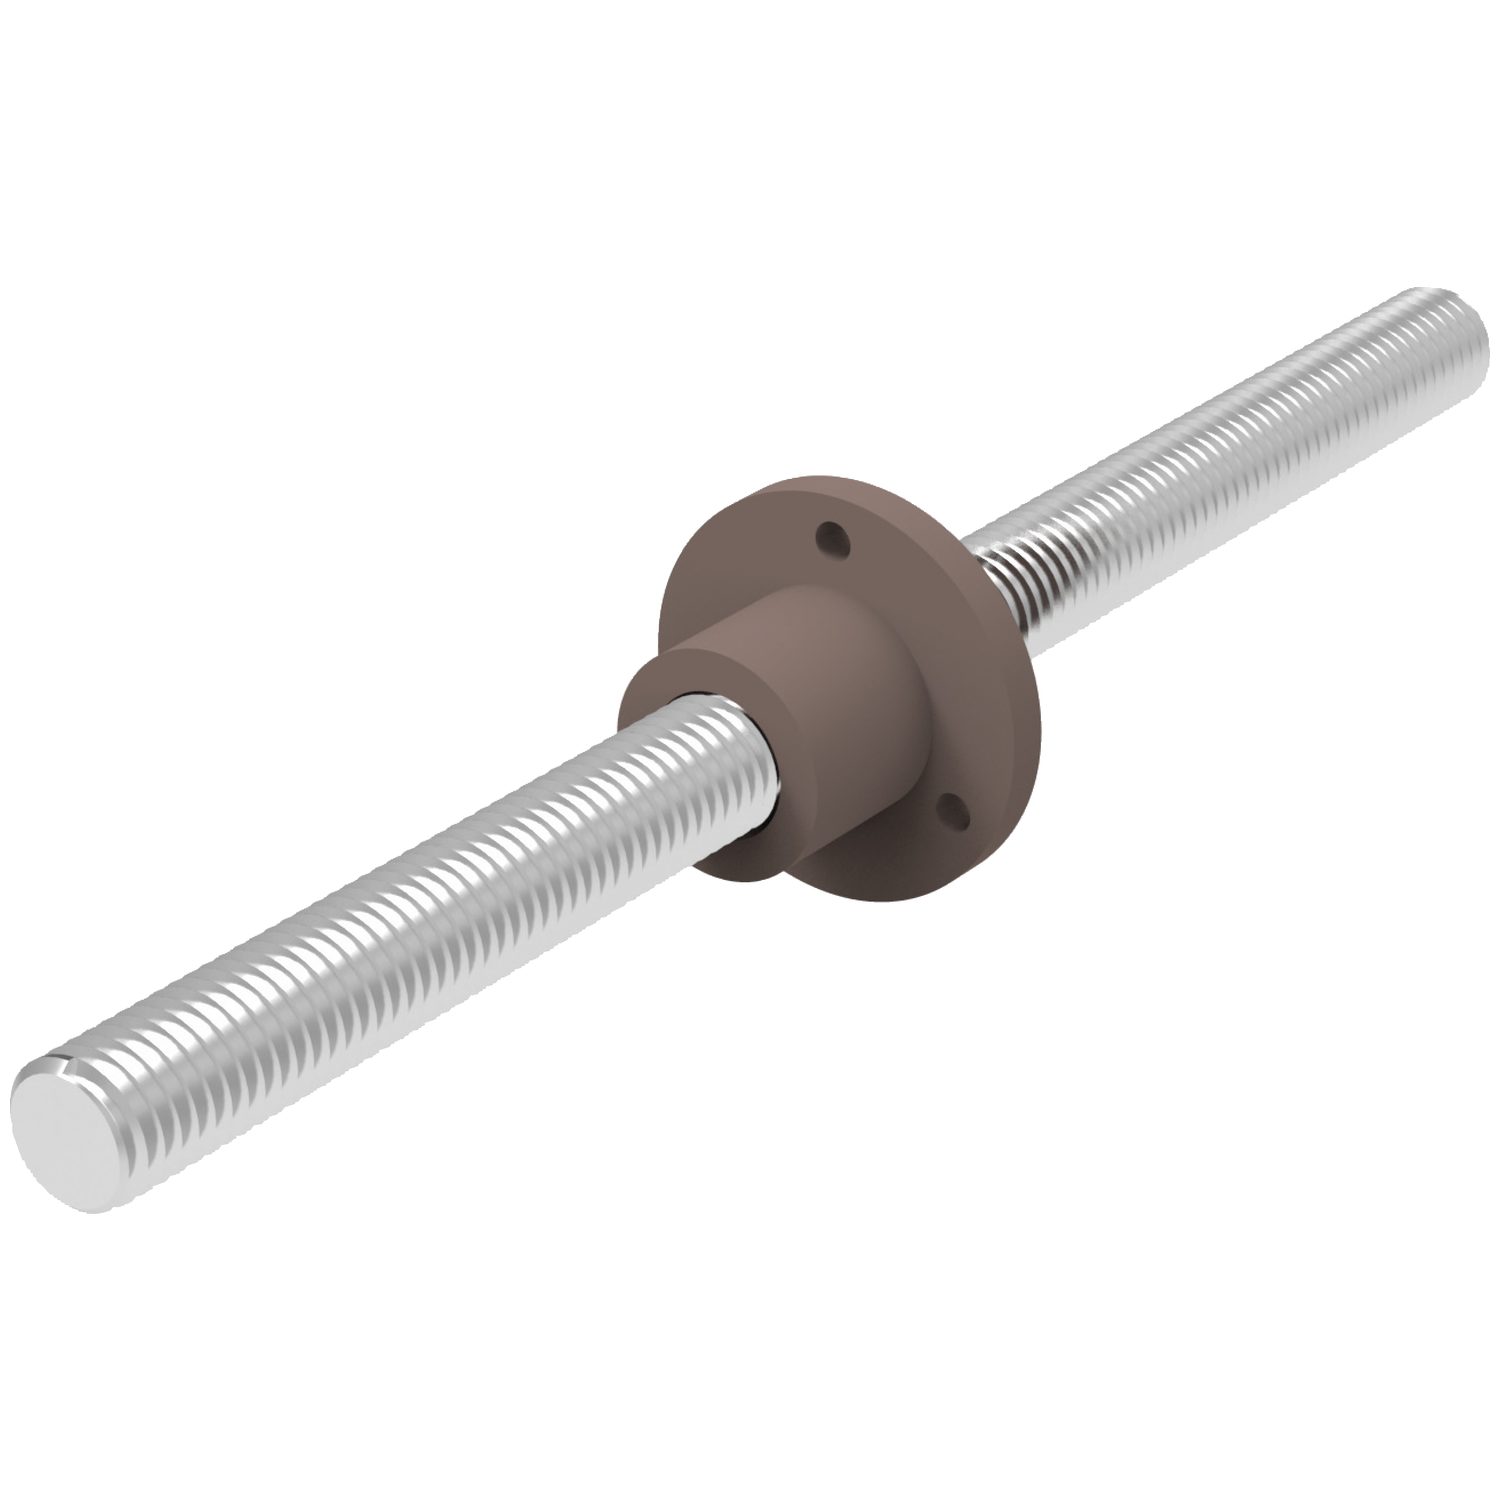 Round Nut Lead Screws High precision lead screws with flanged acetal nuts.